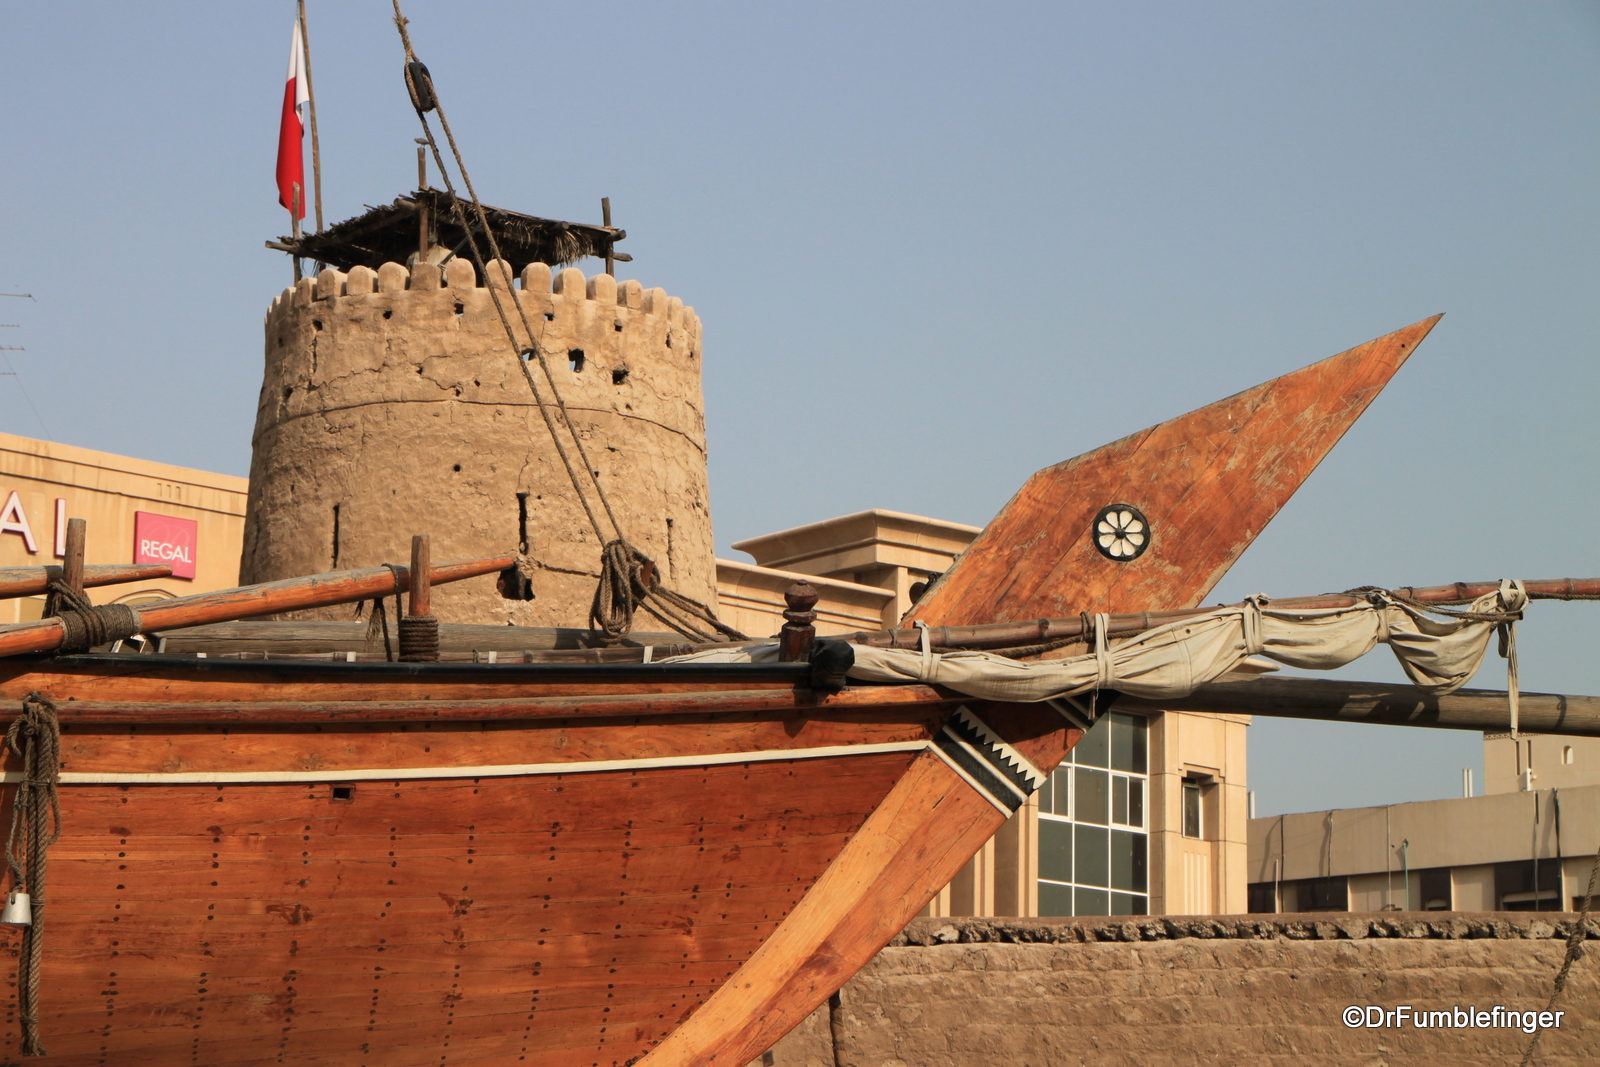 Dhow at the Dubai Museum